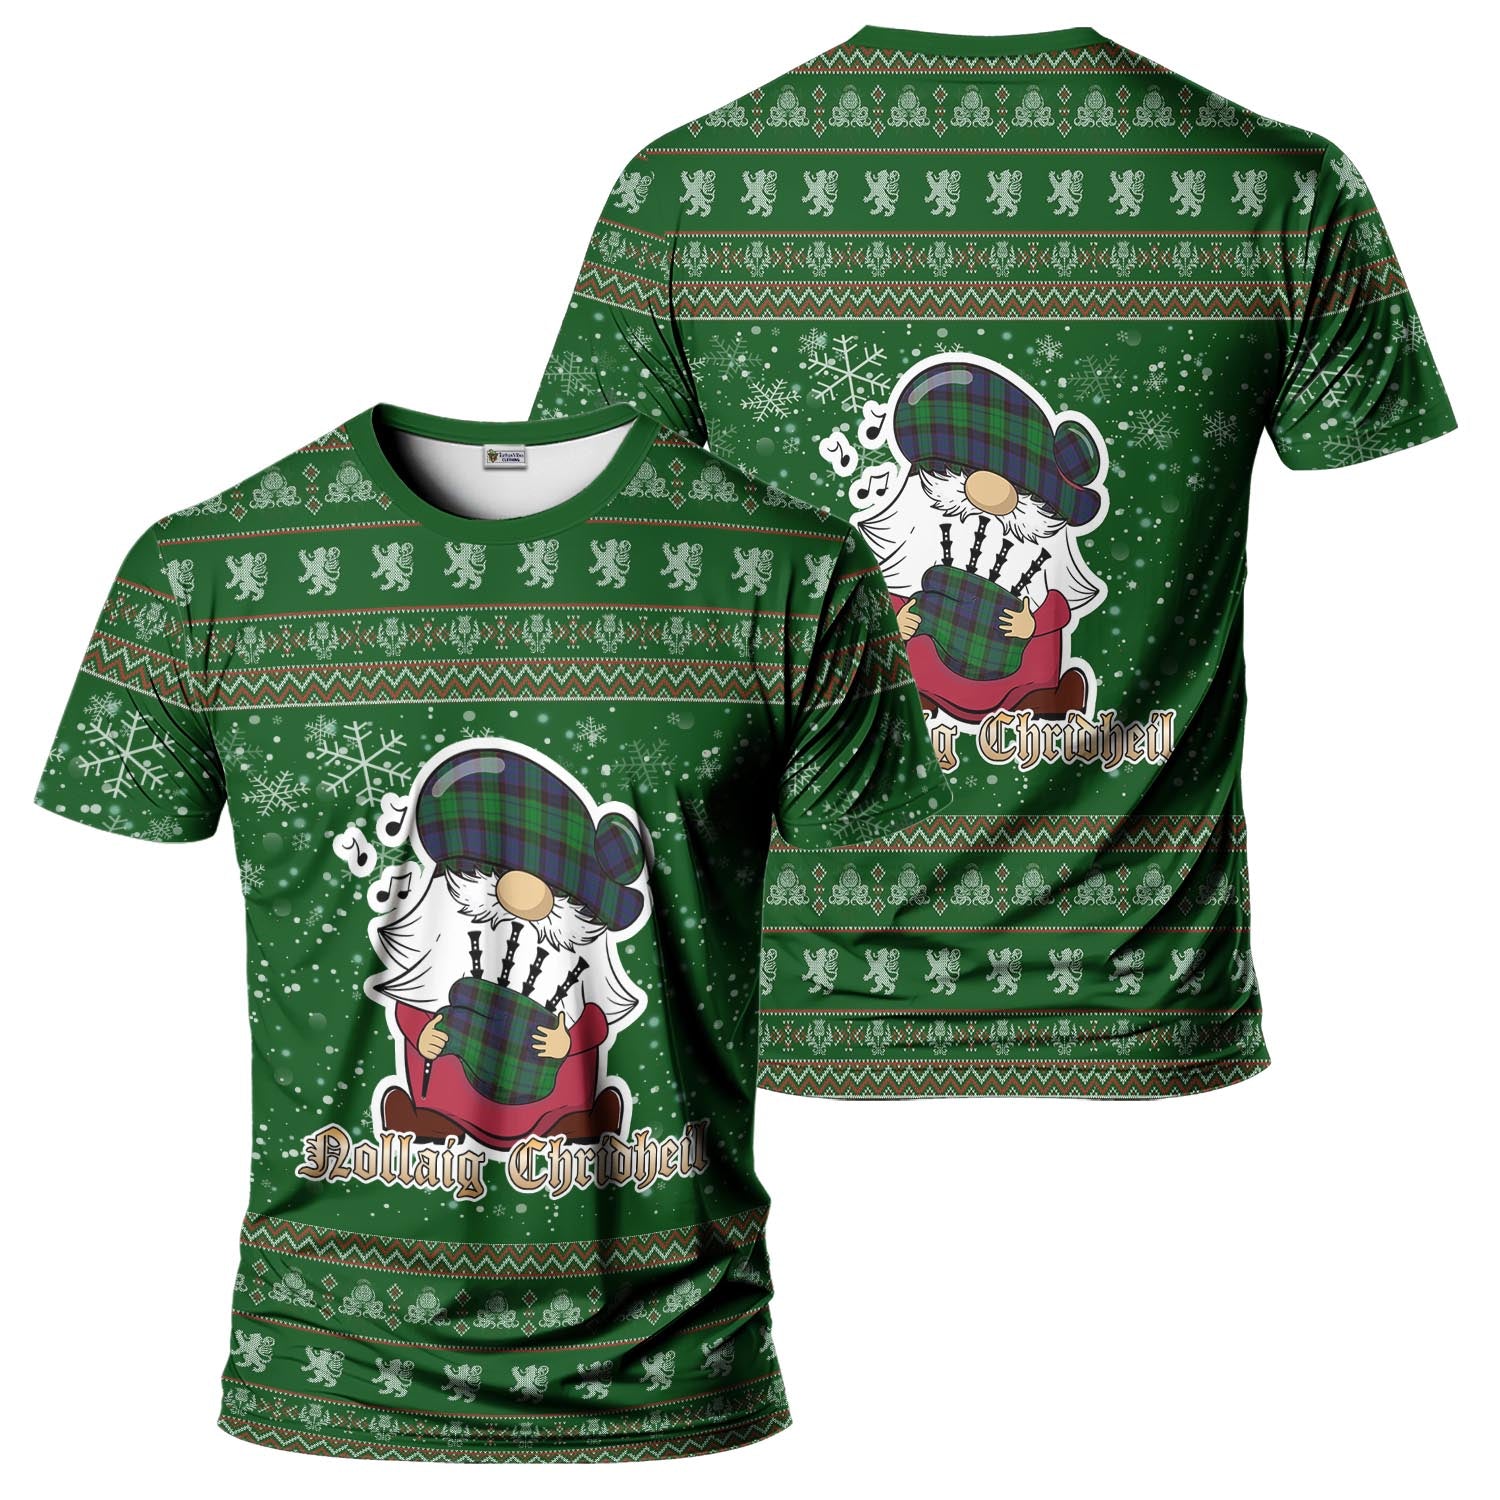 Stewart Old Modern Clan Christmas Family T-Shirt with Funny Gnome Playing Bagpipes Men's Shirt Green - Tartanvibesclothing